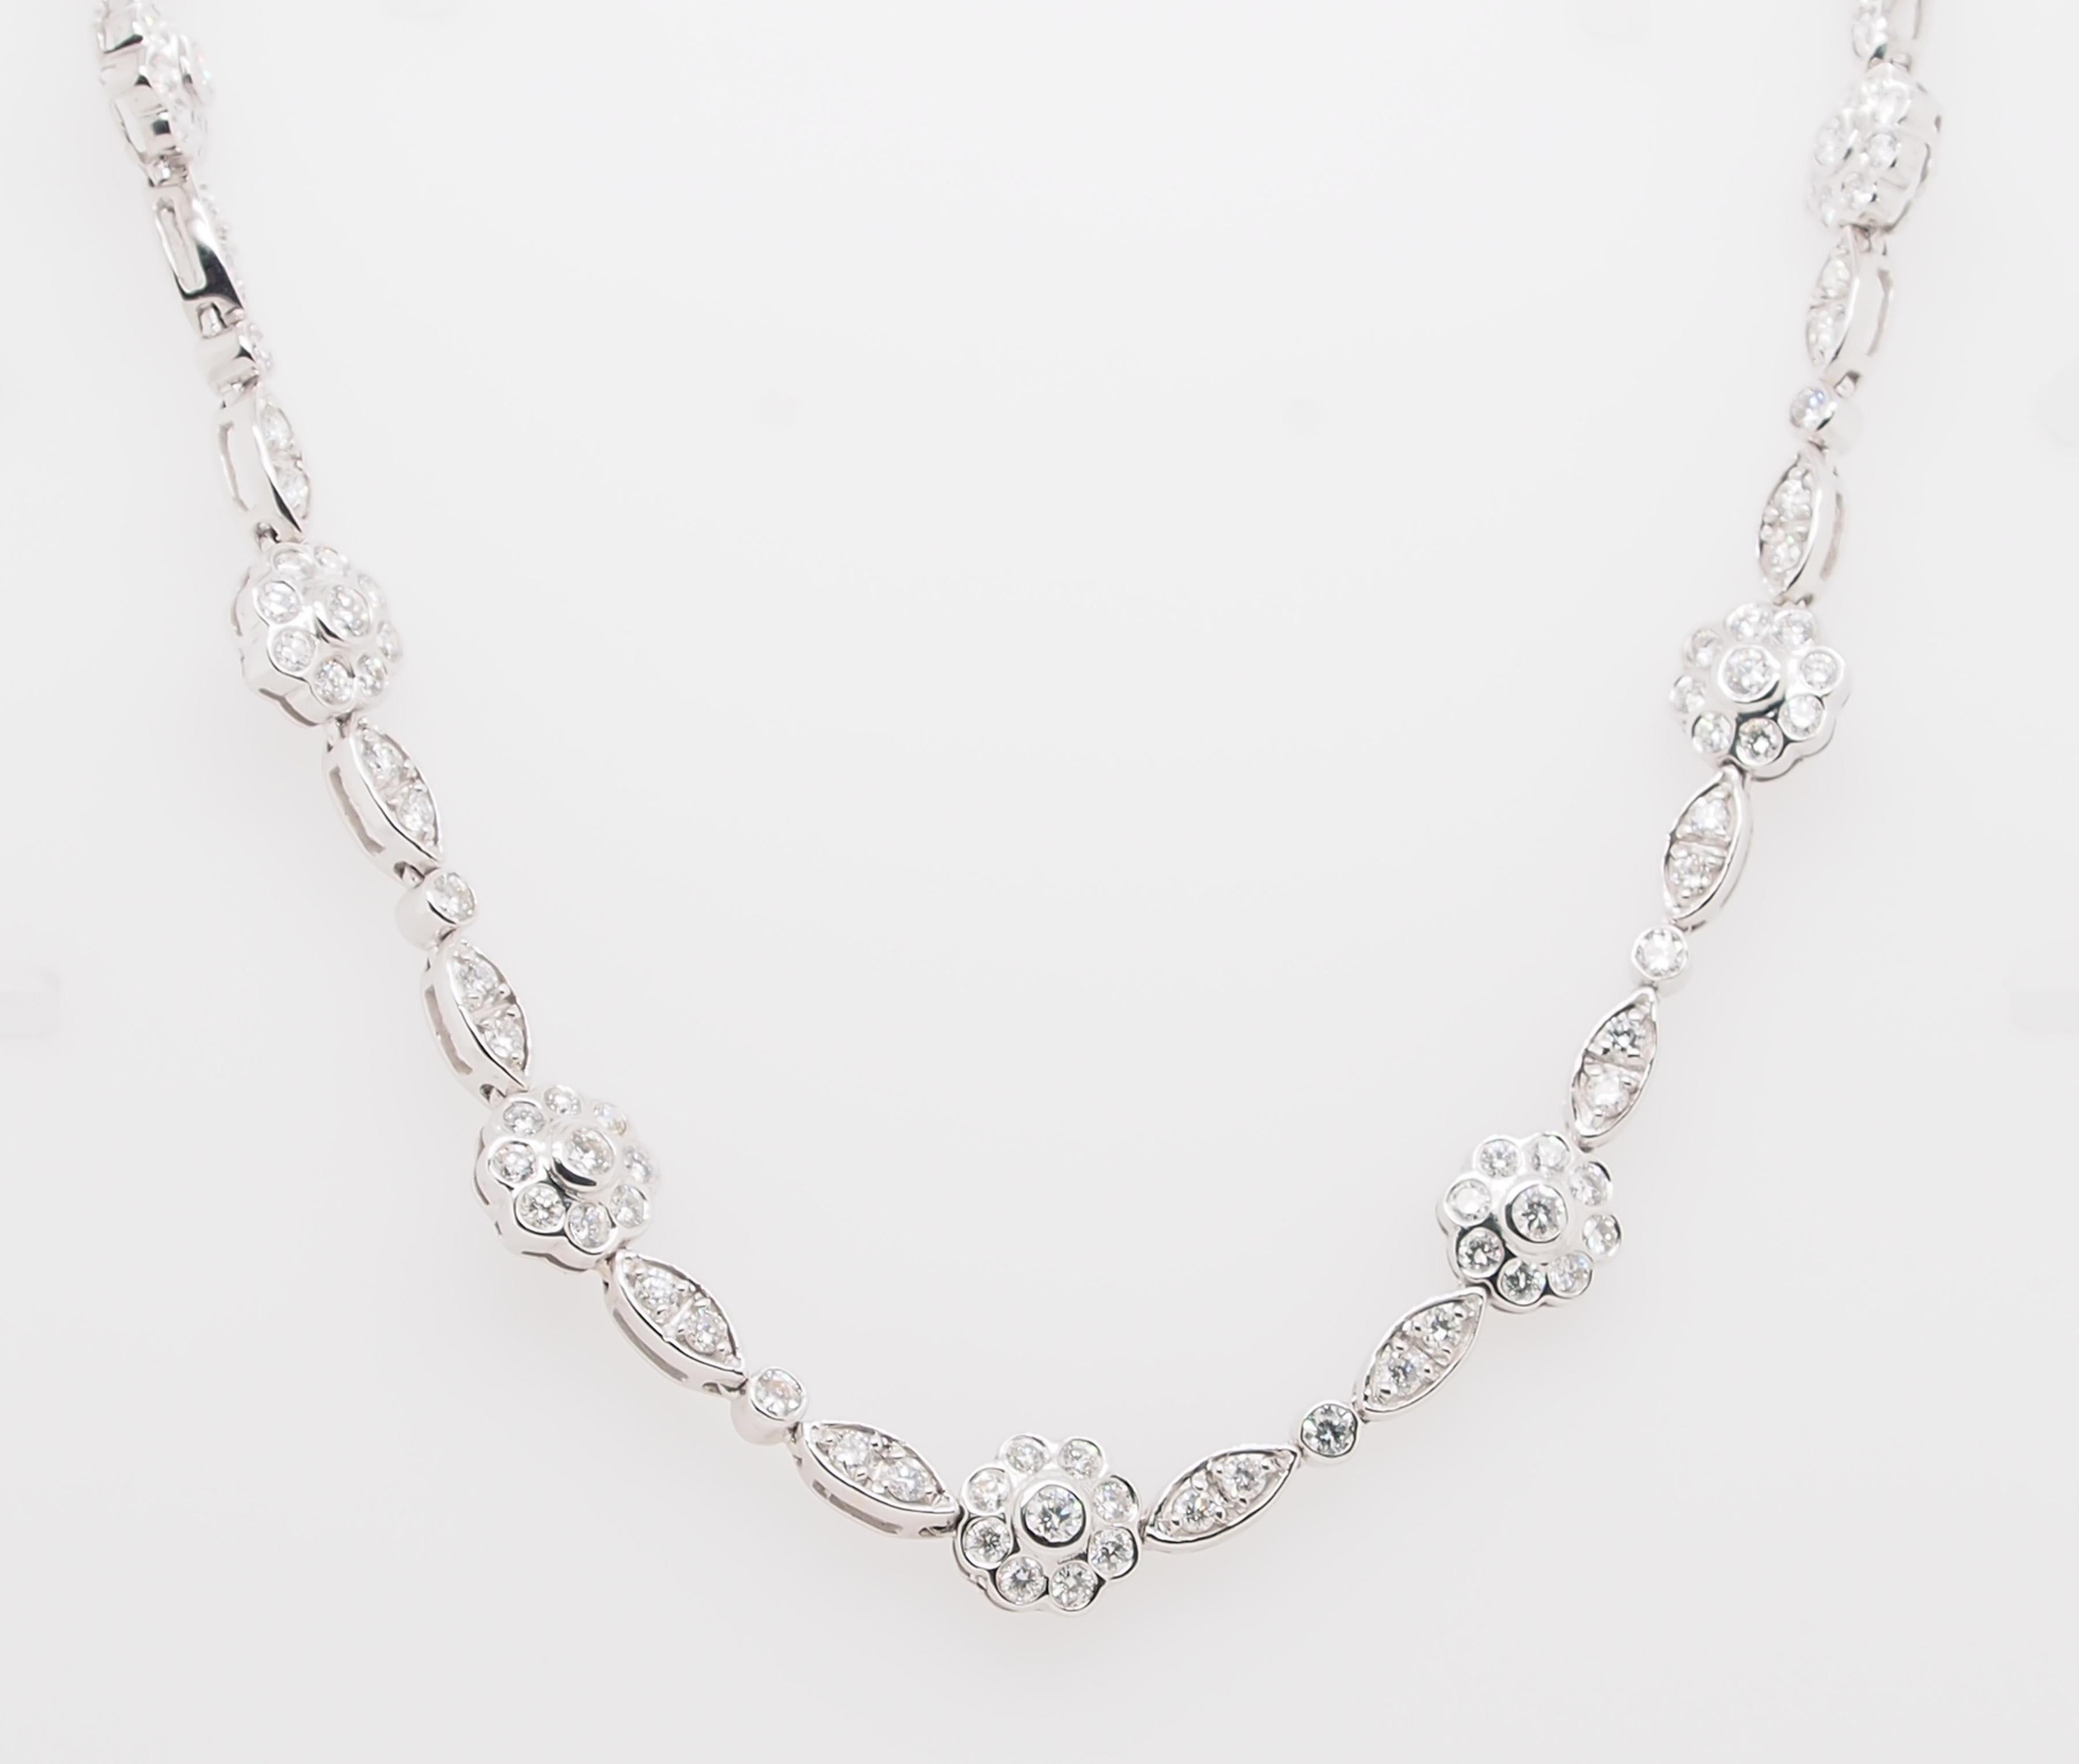 An 18K white gold necklace with 15 Flower clusters, each 3/8 inch in diameter, connected with diamond pave links. 210 Round Brilliant Cut Diamonds 7.75 carat total weight G-H in color, VS in clarity. The necklace is 16 inches and weighs